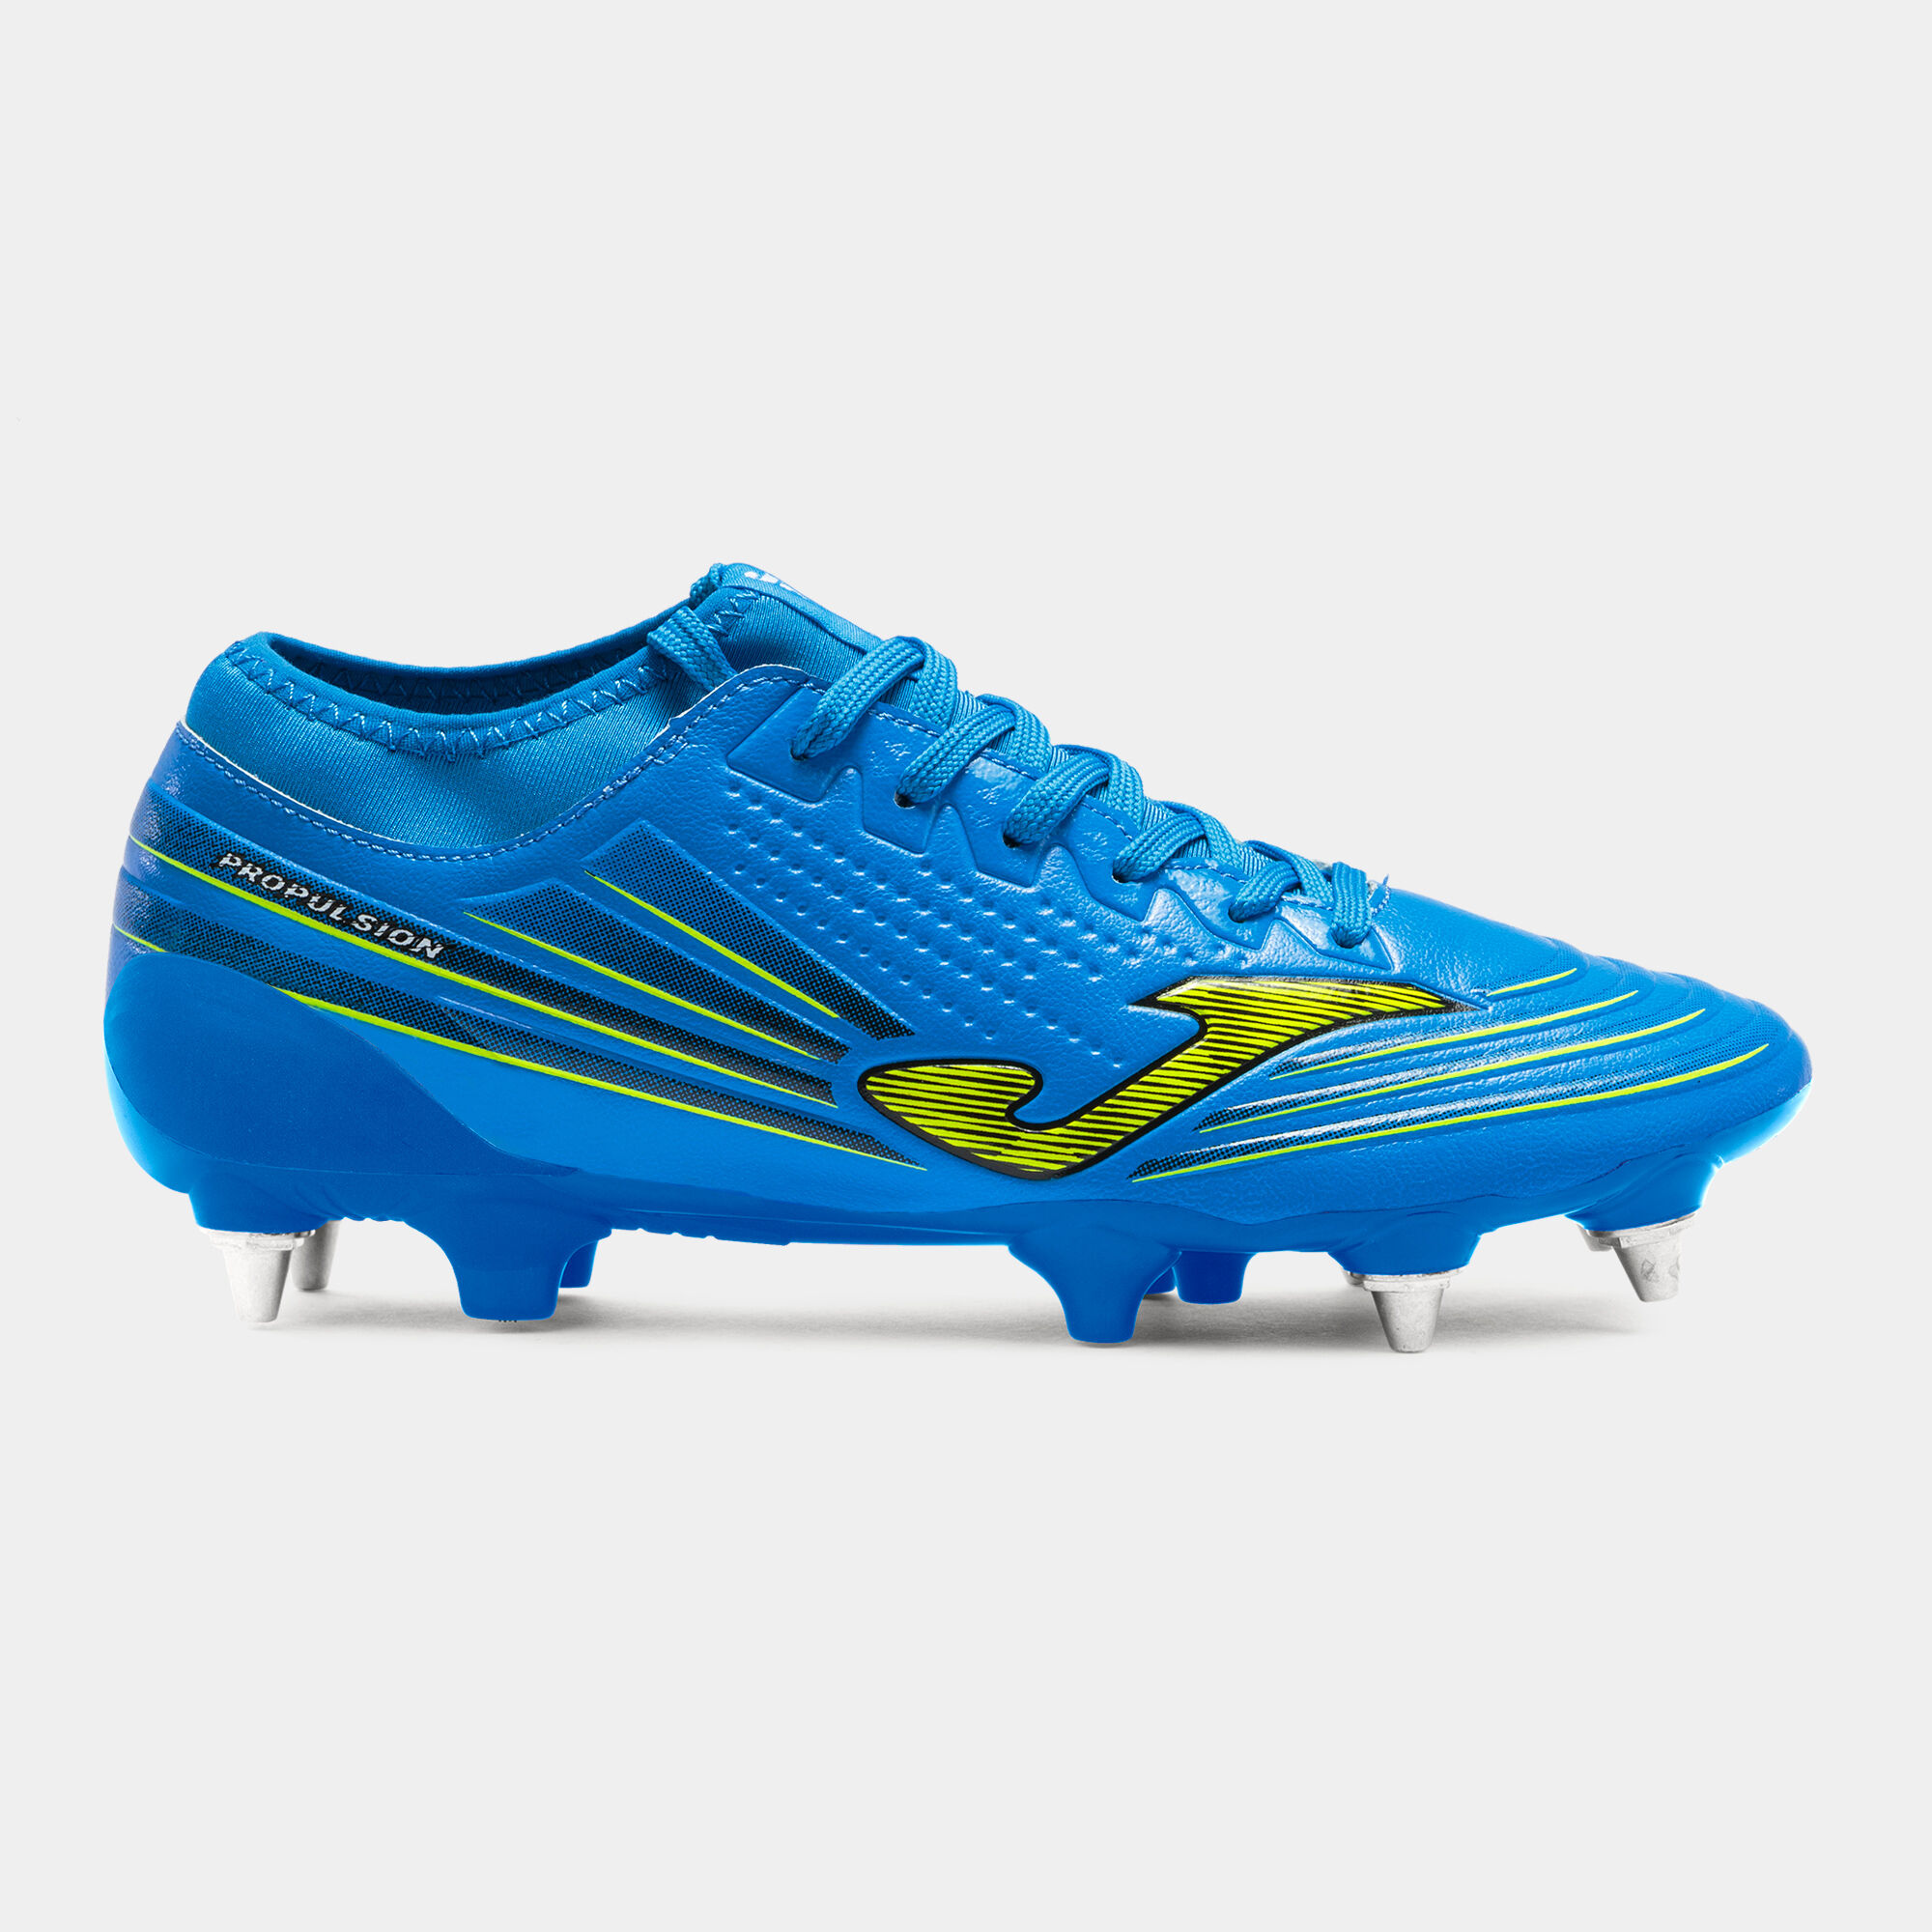 FOOTBALL BOOTS PROPULSION CUP 21 SOFT GROUND ROYAL BLUE